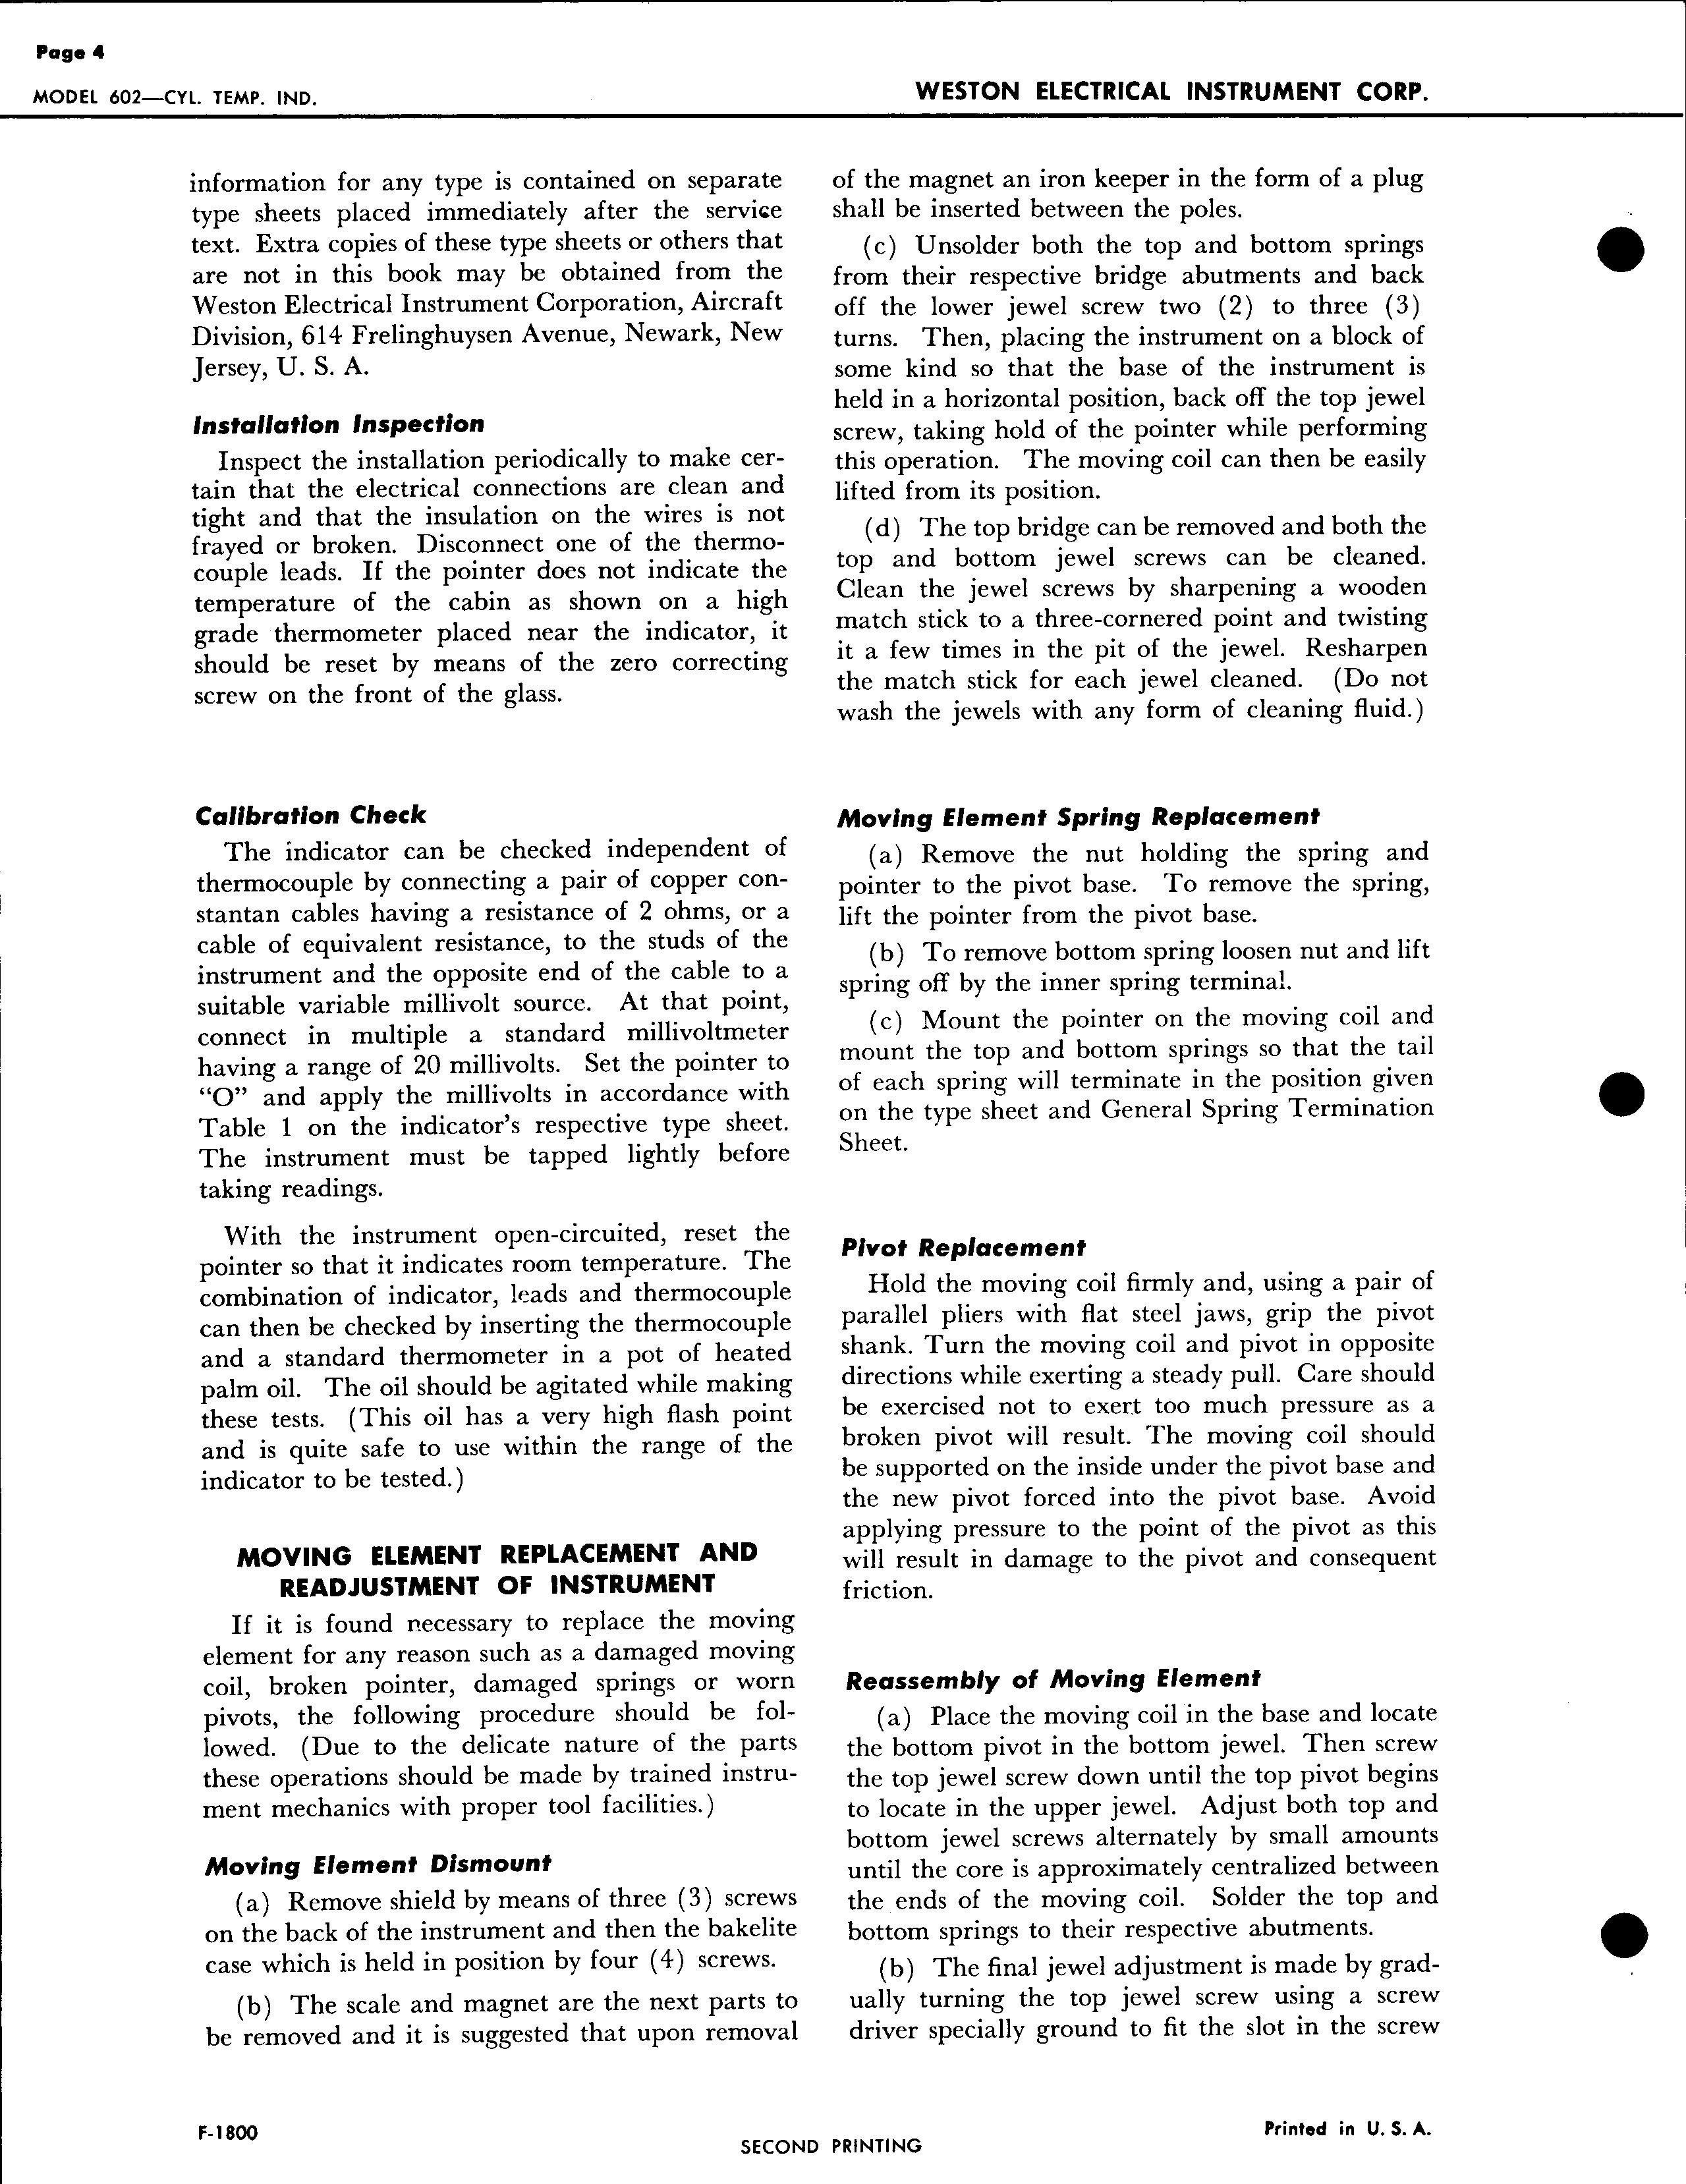 Sample page 4 from AirCorps Library document: Service Instructions for Model 602 Cylinder Temperature Indicators